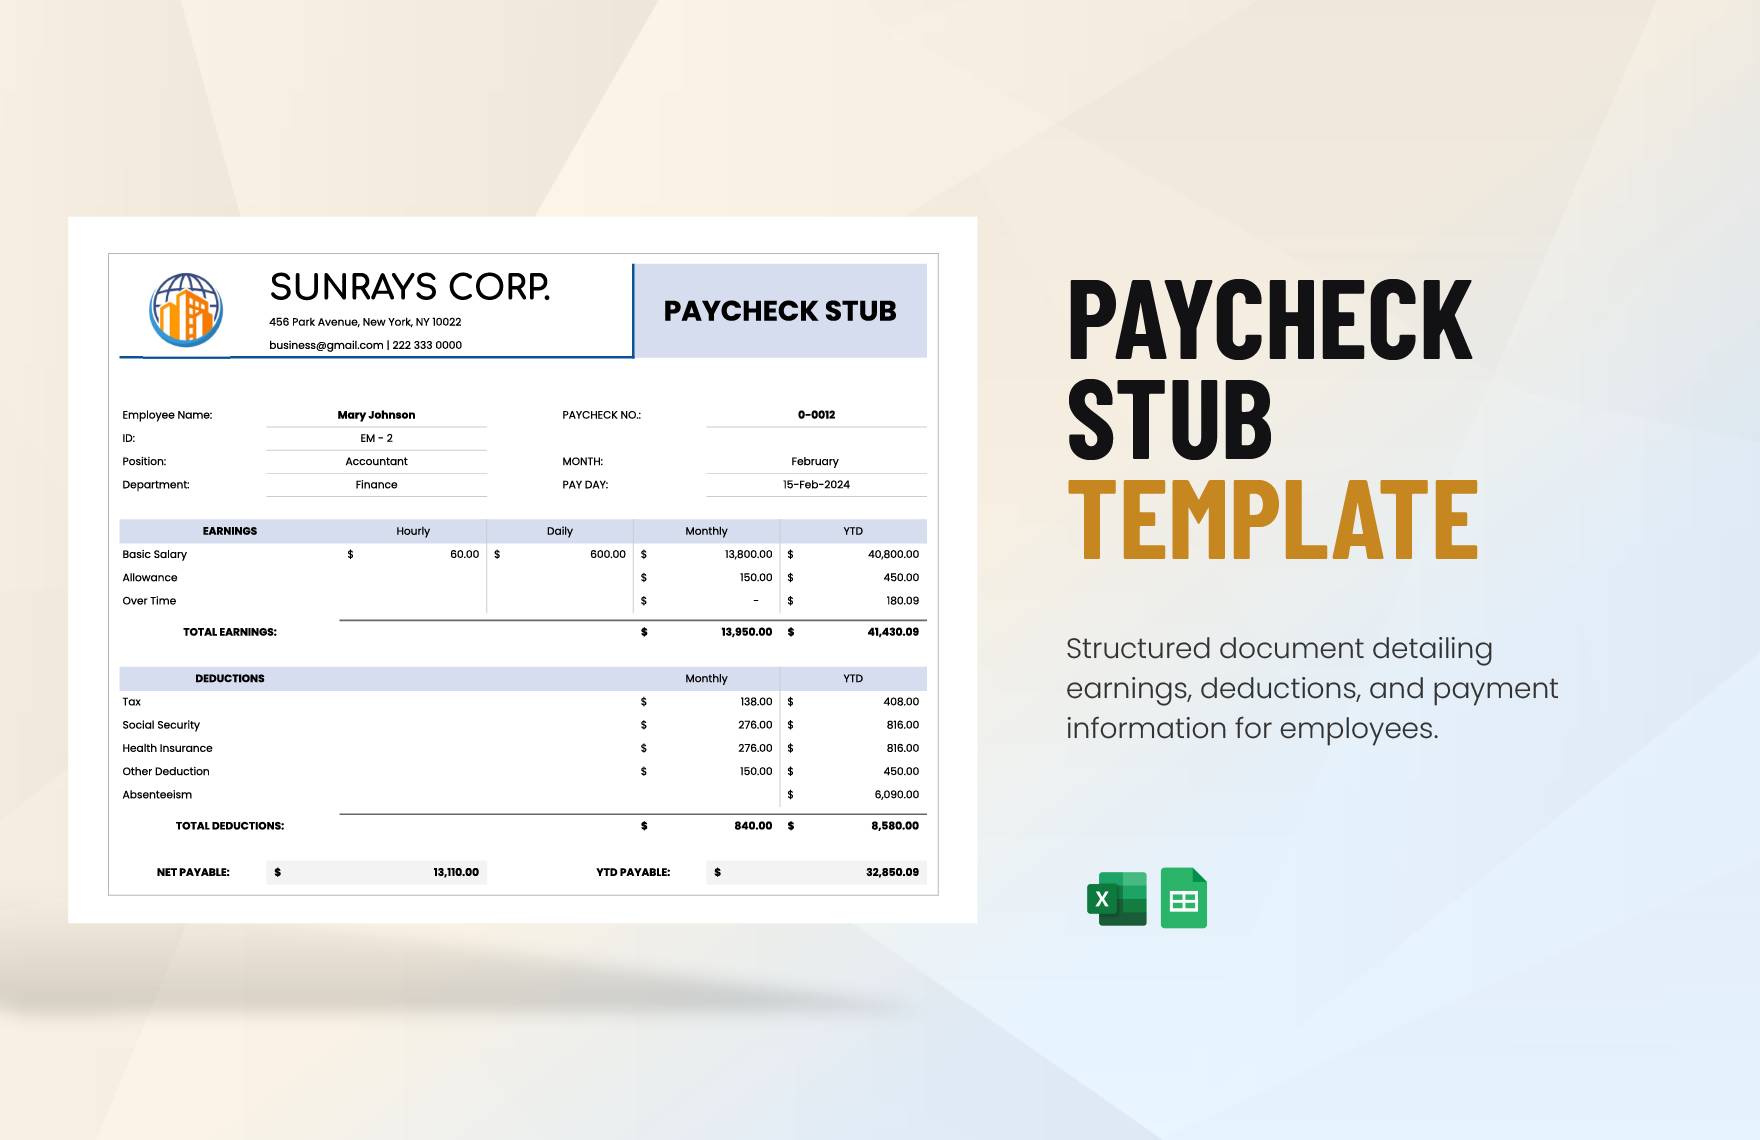 Paycheck Stub Template in Excel, Google Sheets